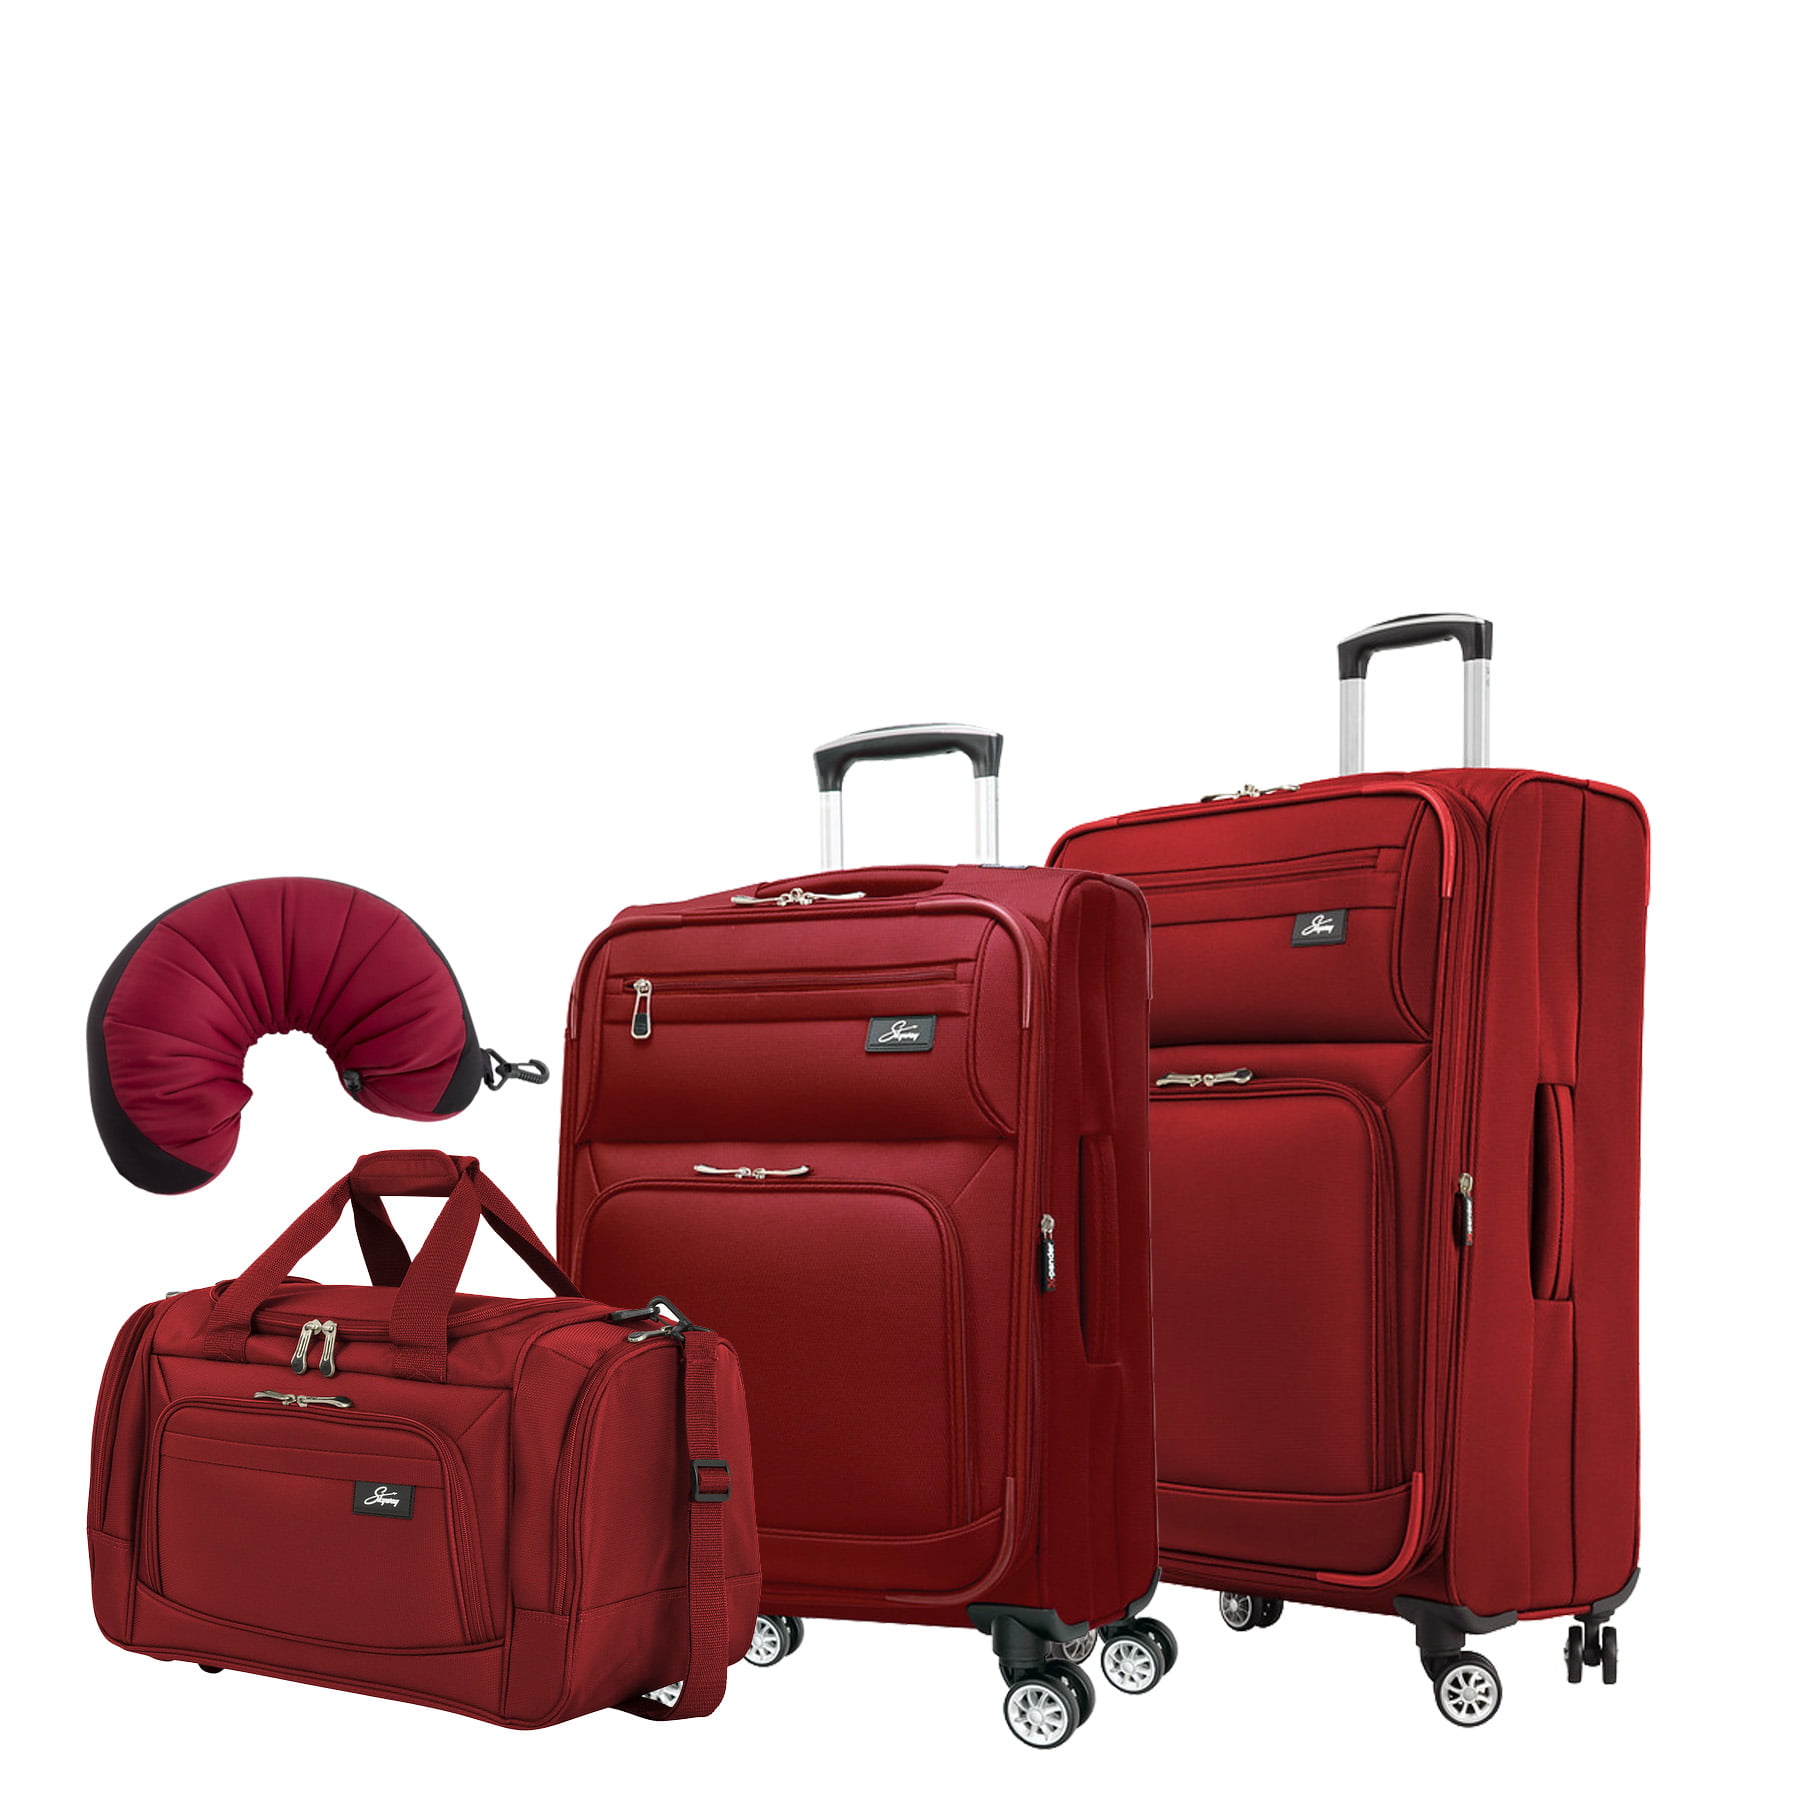 One Size Skyway Luggage Sigma 5.0 16-Inch Shoulder Tote Merlot Red